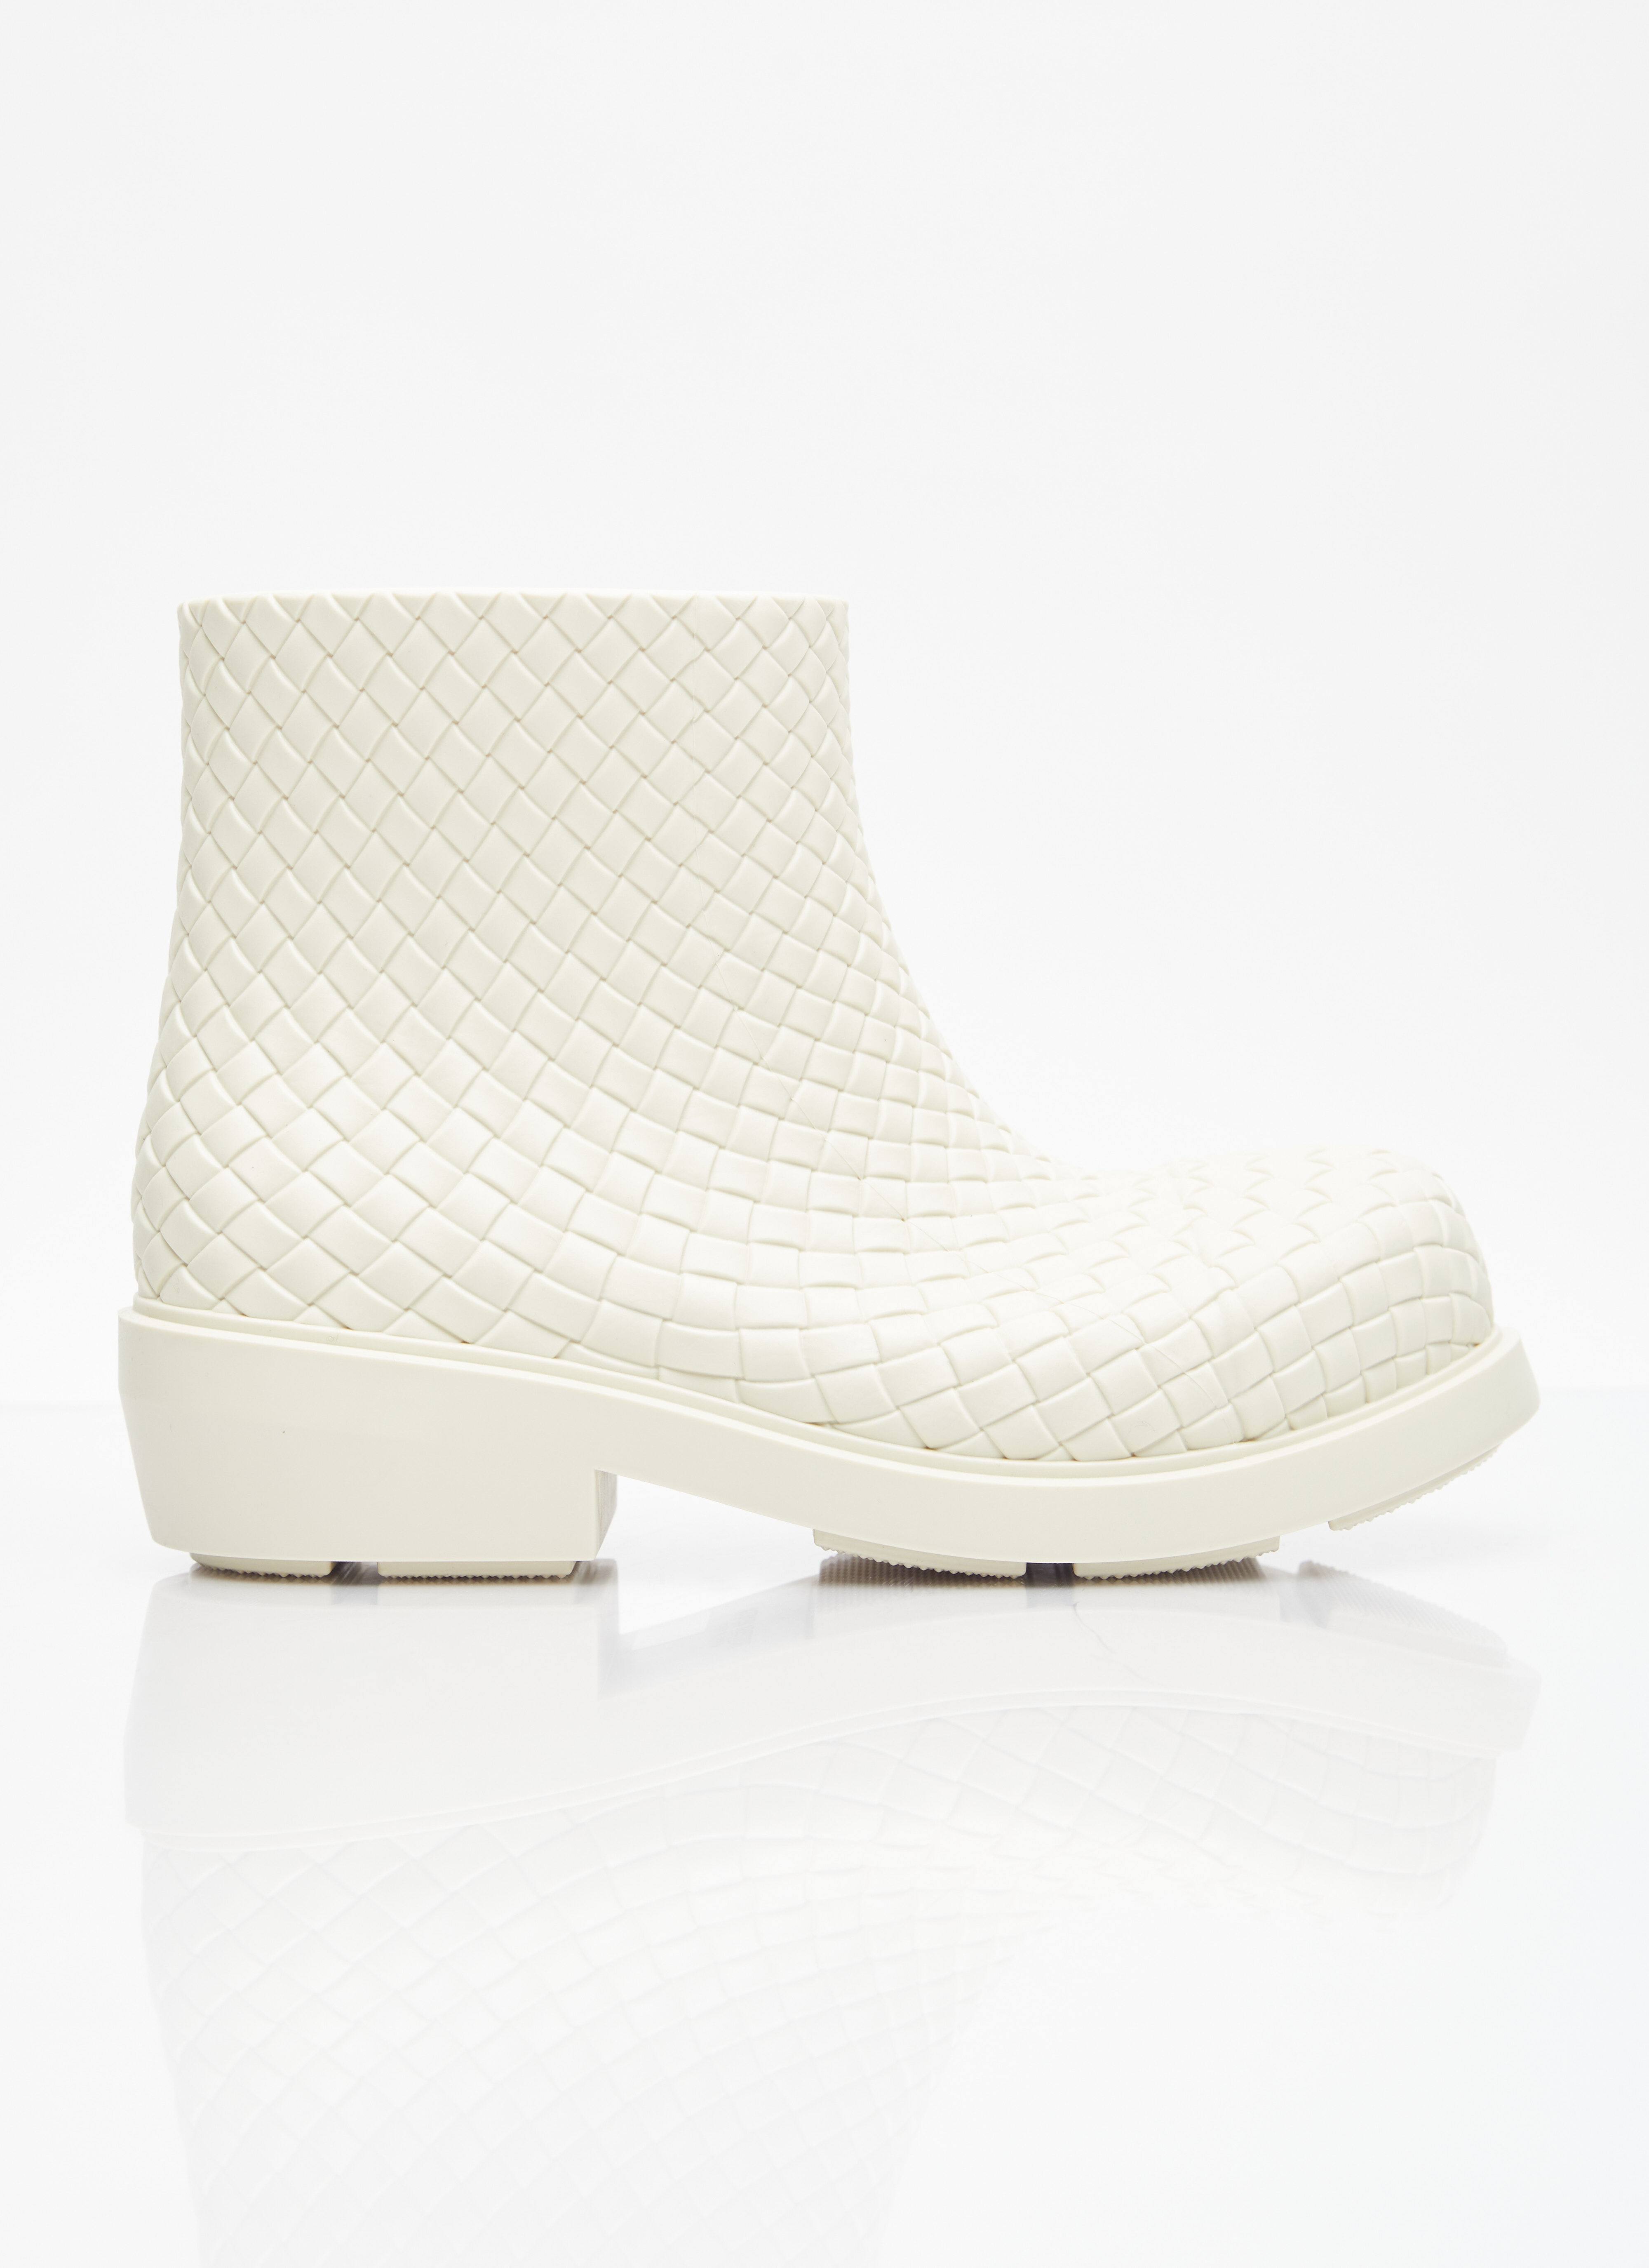 Vivienne Westwood Fireman Ankle Boots White vvw0255056